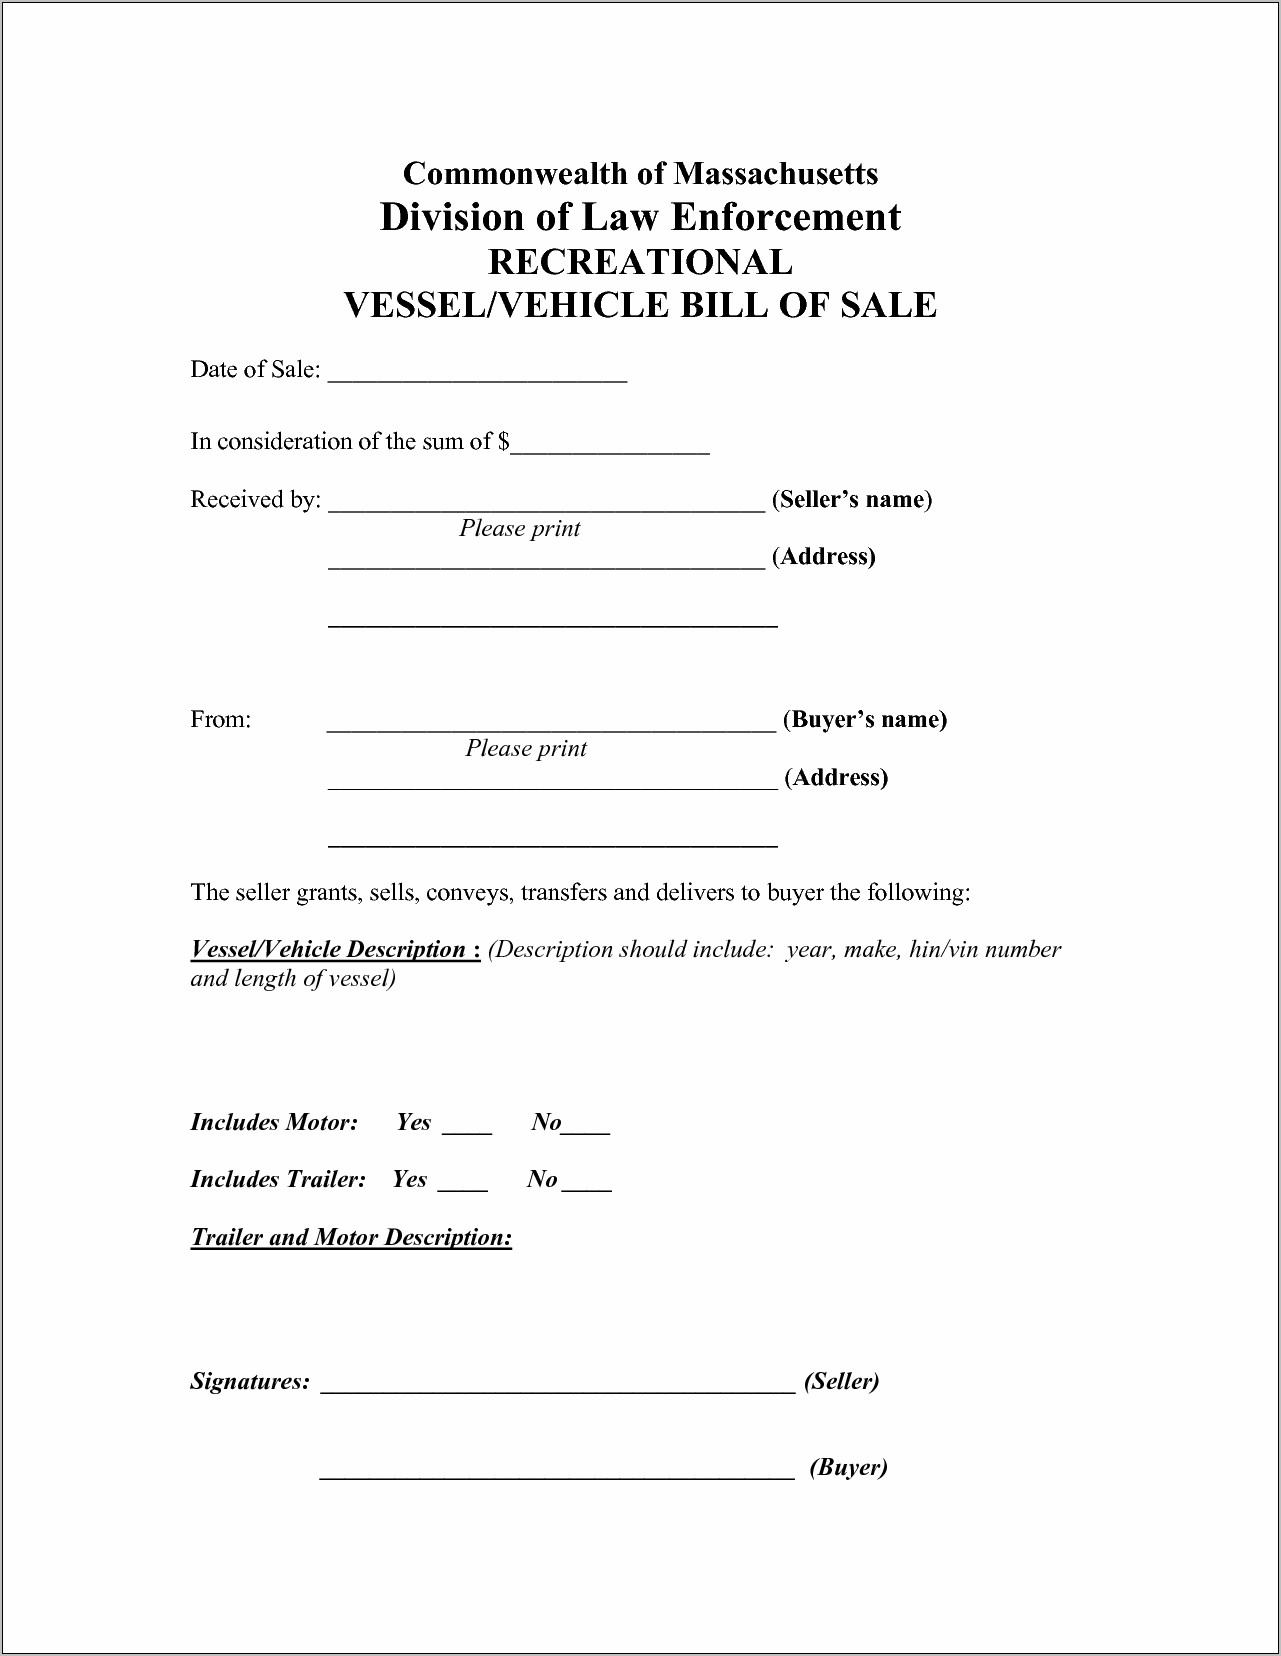 Texas Boat Bill Of Sale Form Free